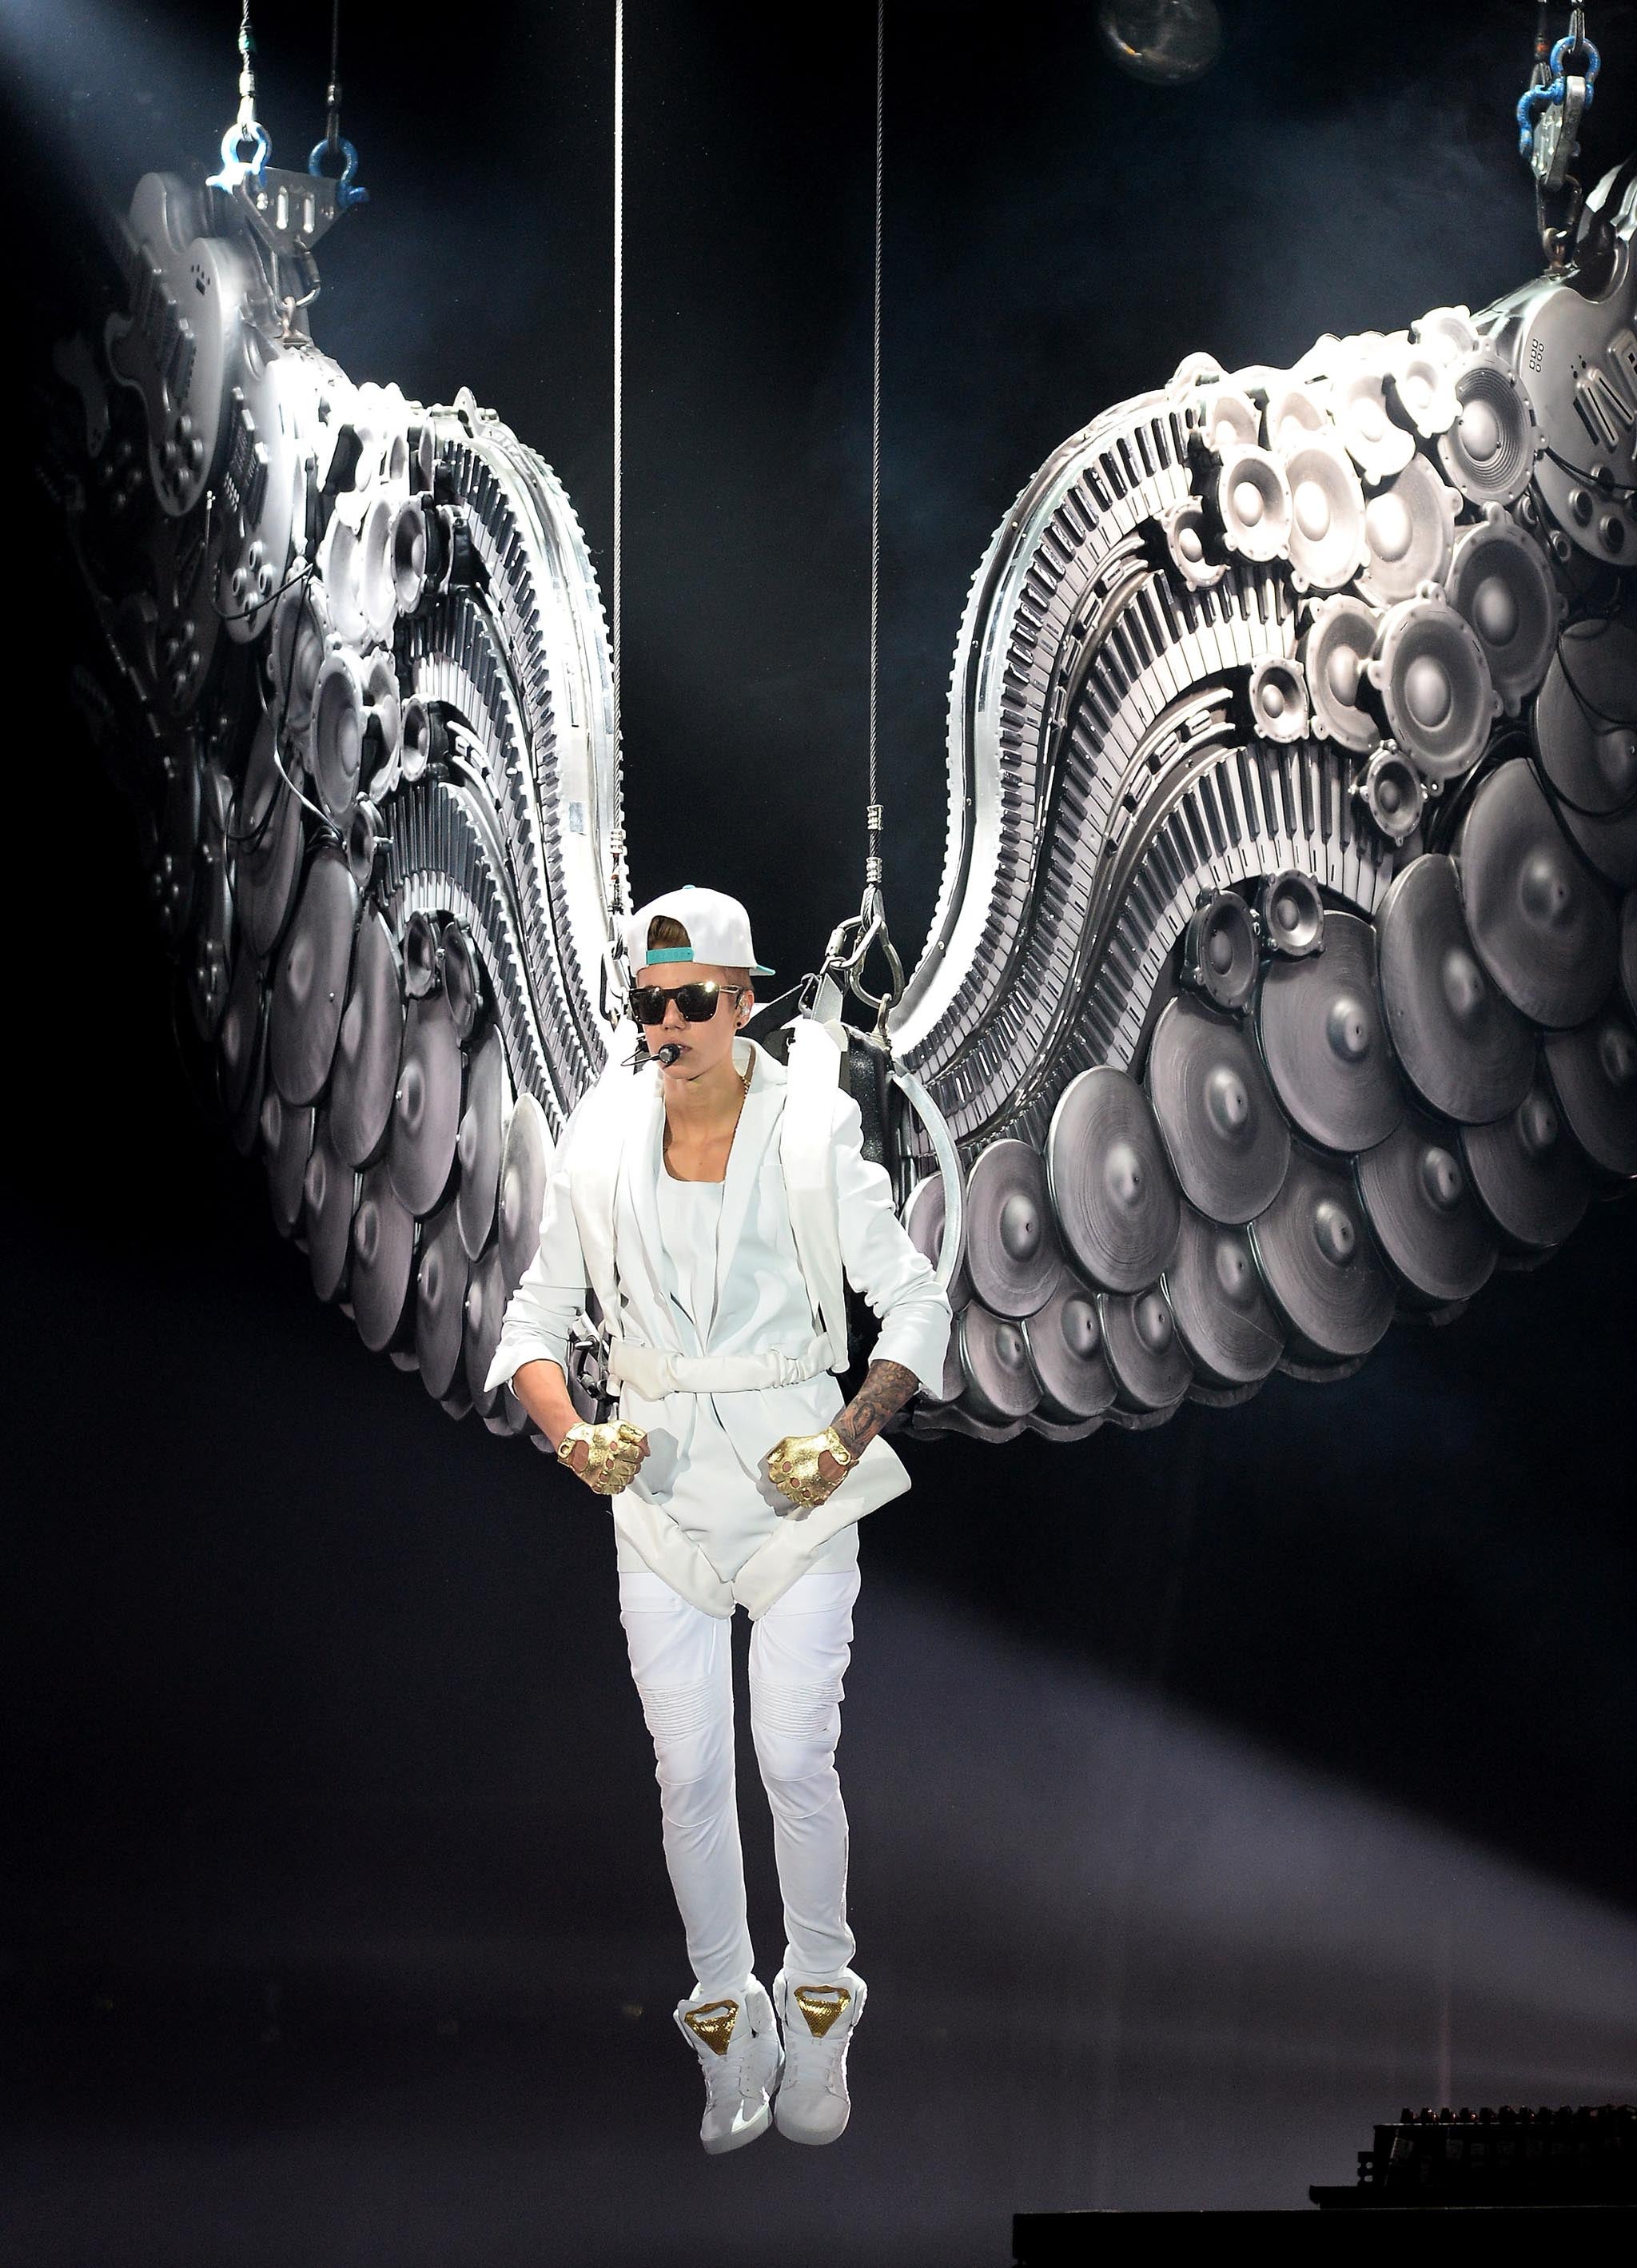 Justin Bieber appears suspended from the ceiling as an angel as part of his 'Believe' world tour